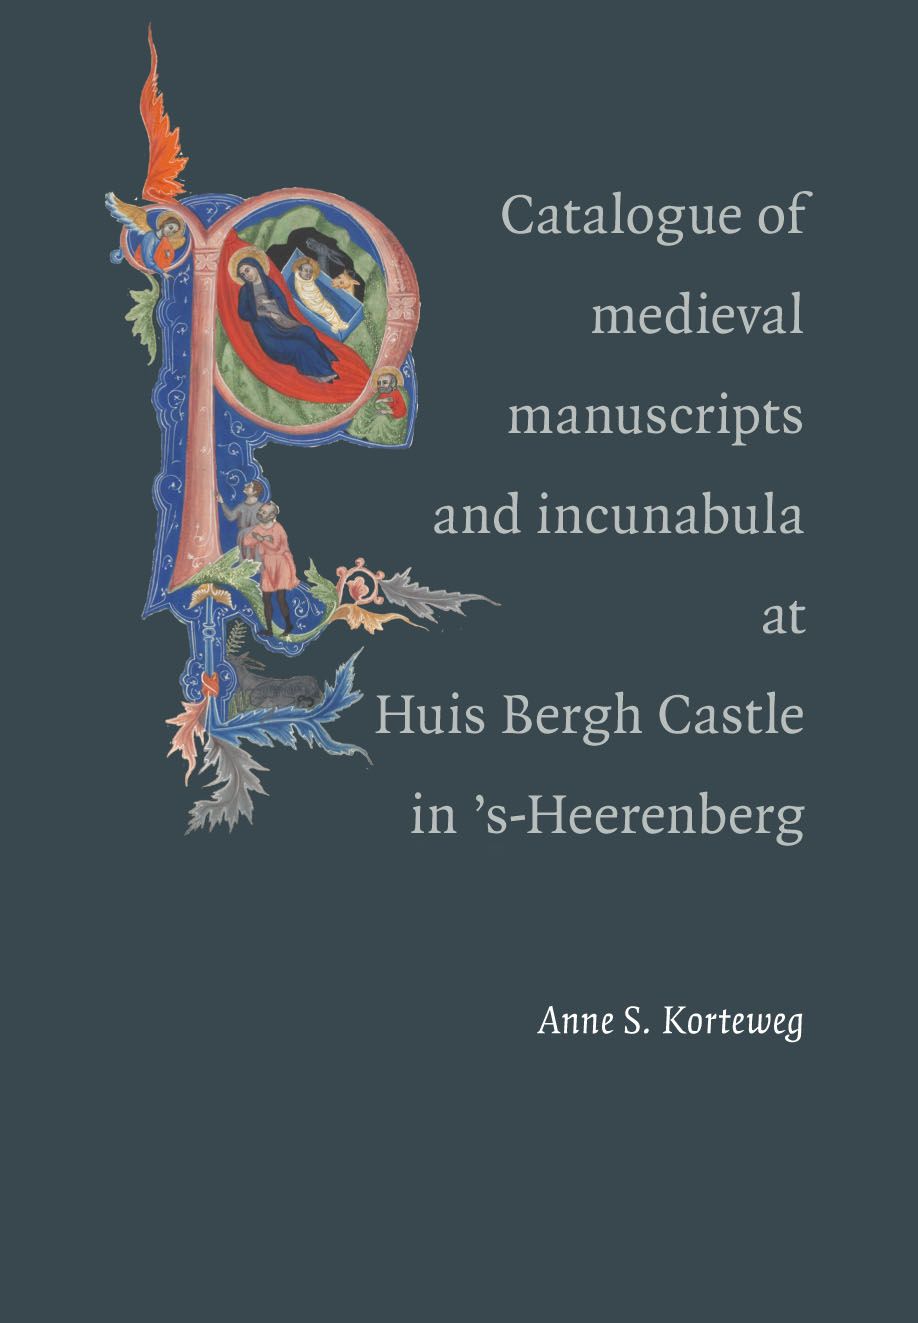 Catalogue of the Medieval Manuscripts and Incunabula at Huis Bergh Castle in 's-Heerenberg